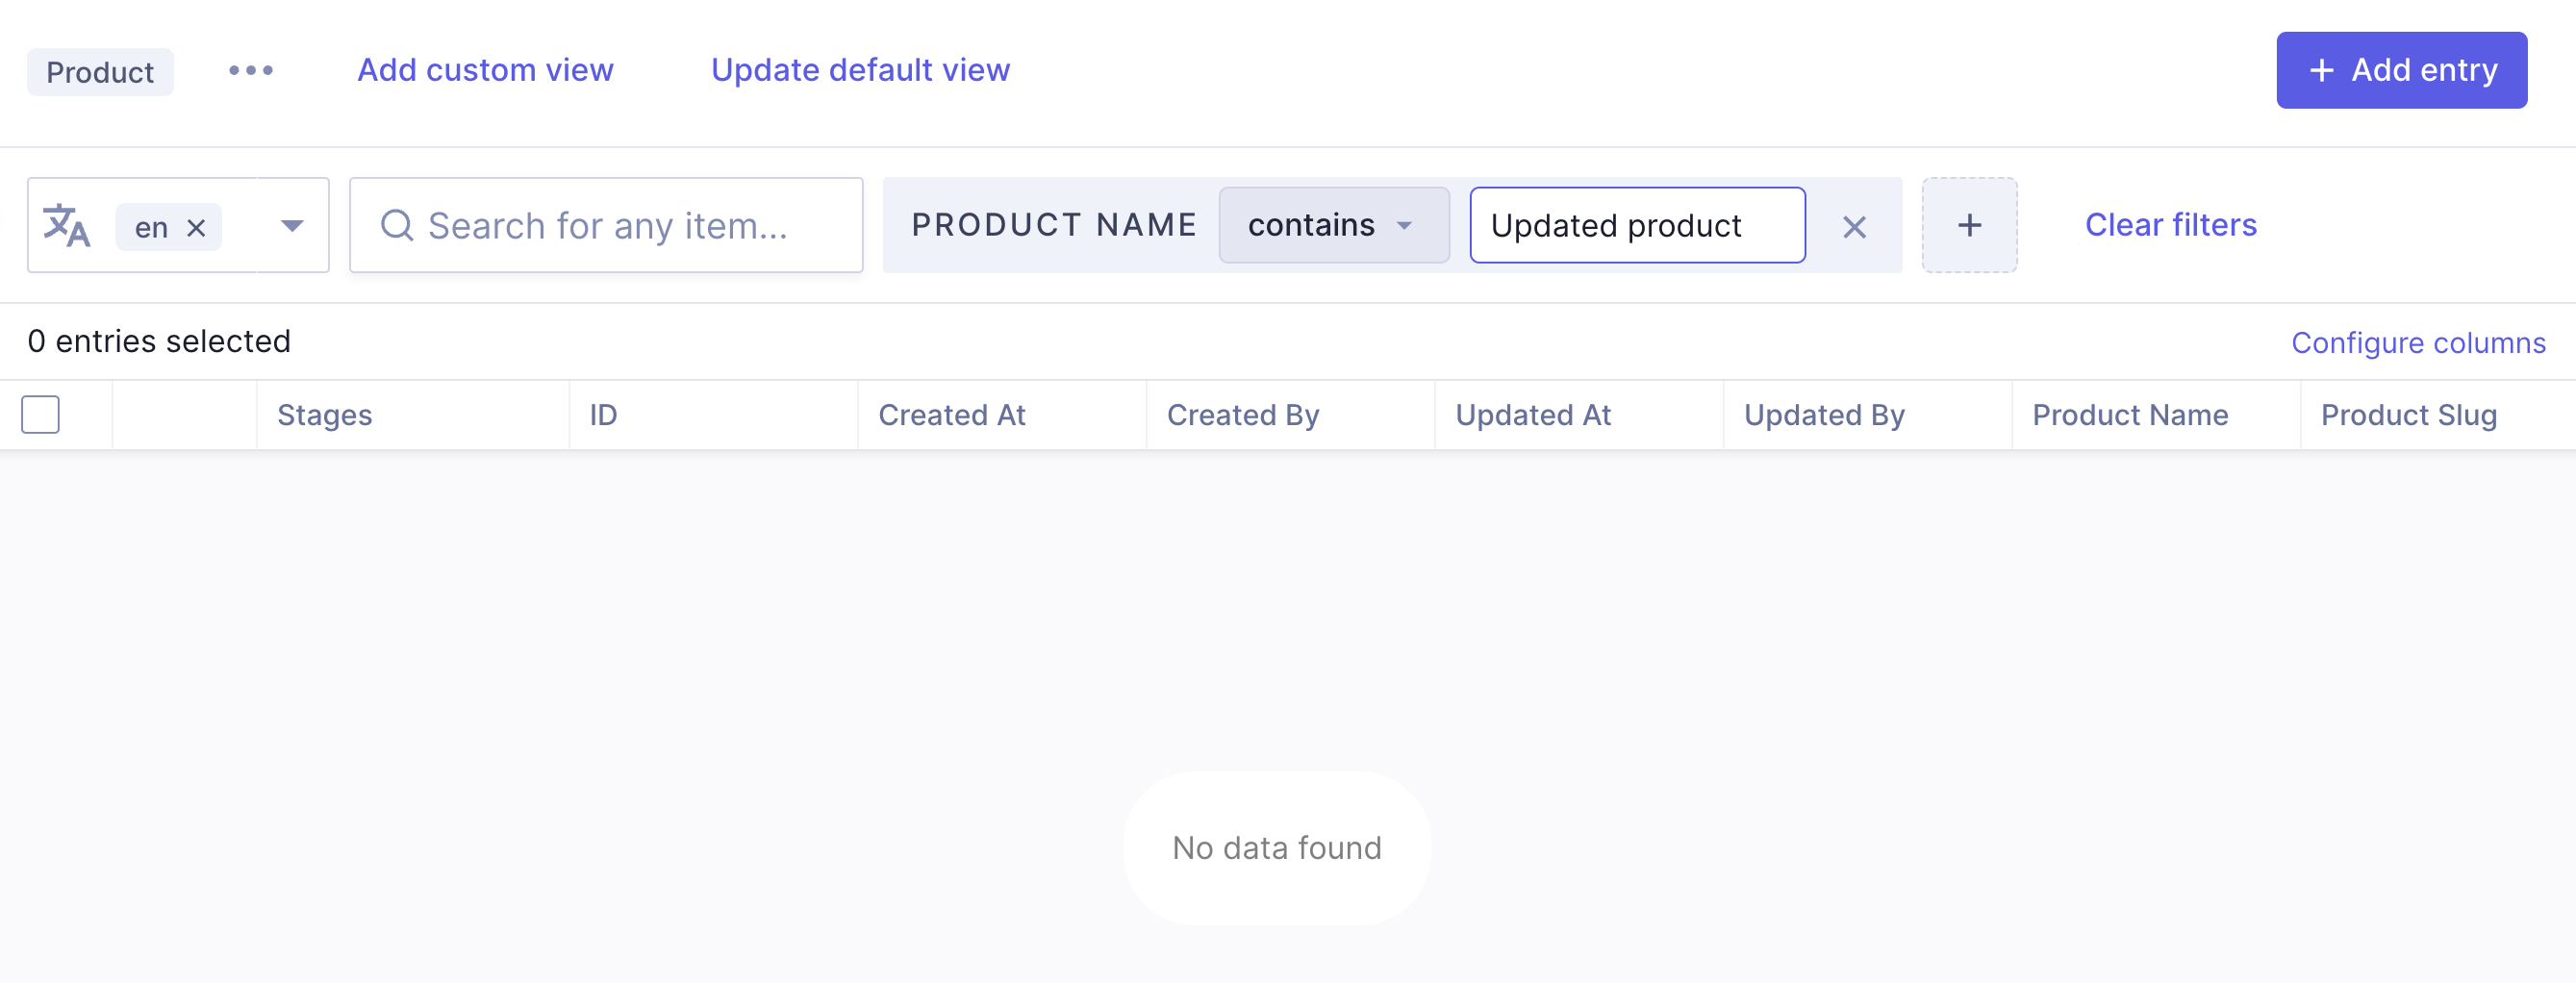 Deleted product